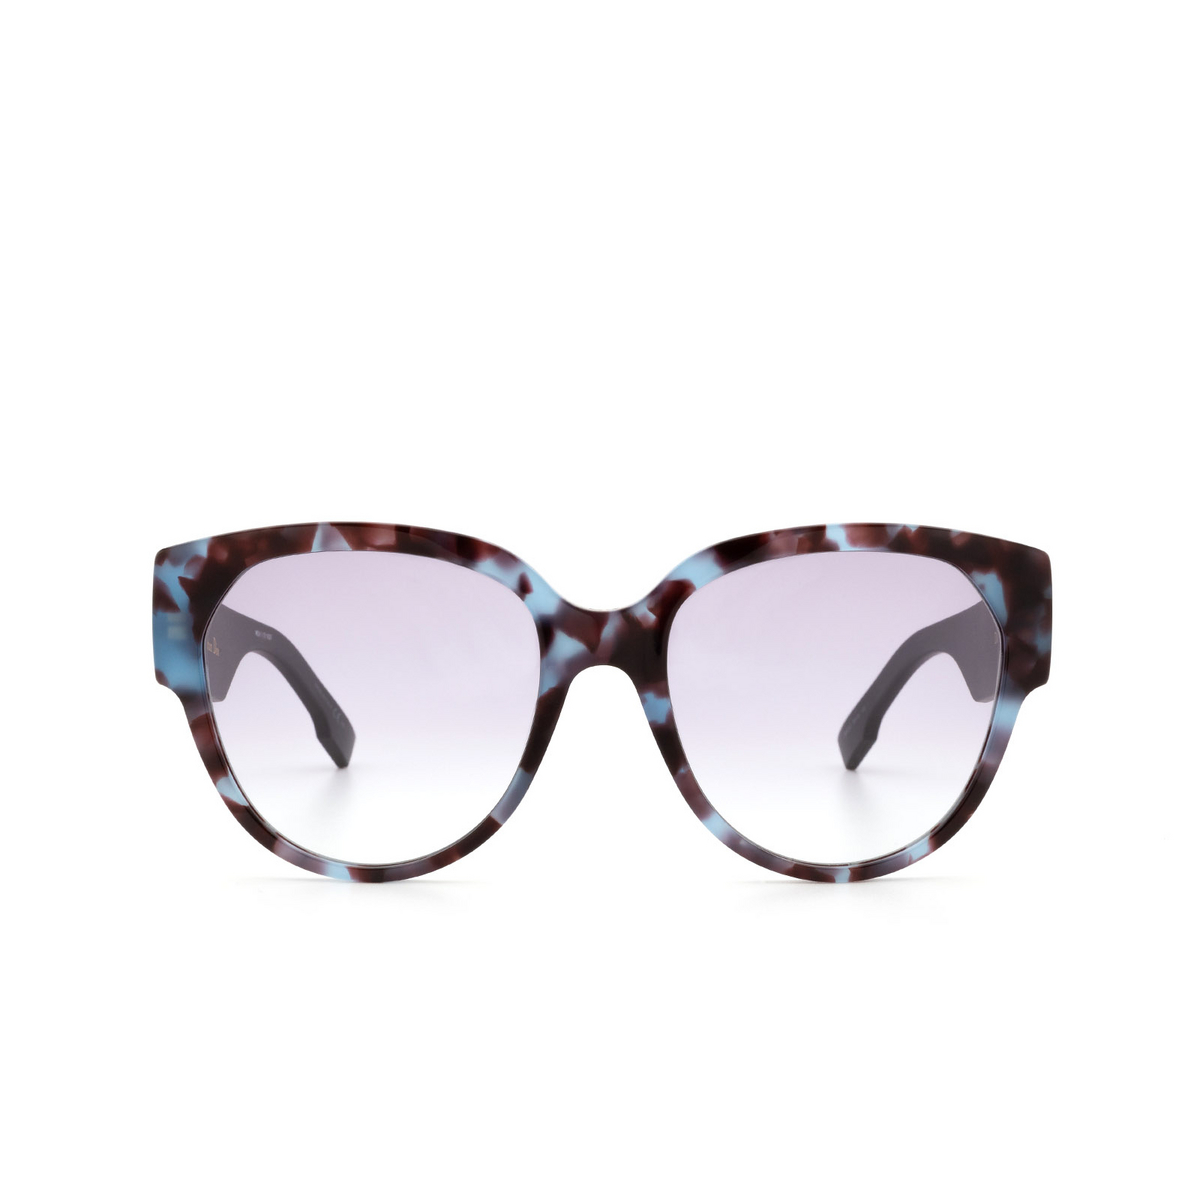 Dior® Butterfly Sunglasses: DIORID2 color Blue Havana Jbw/so - front view.